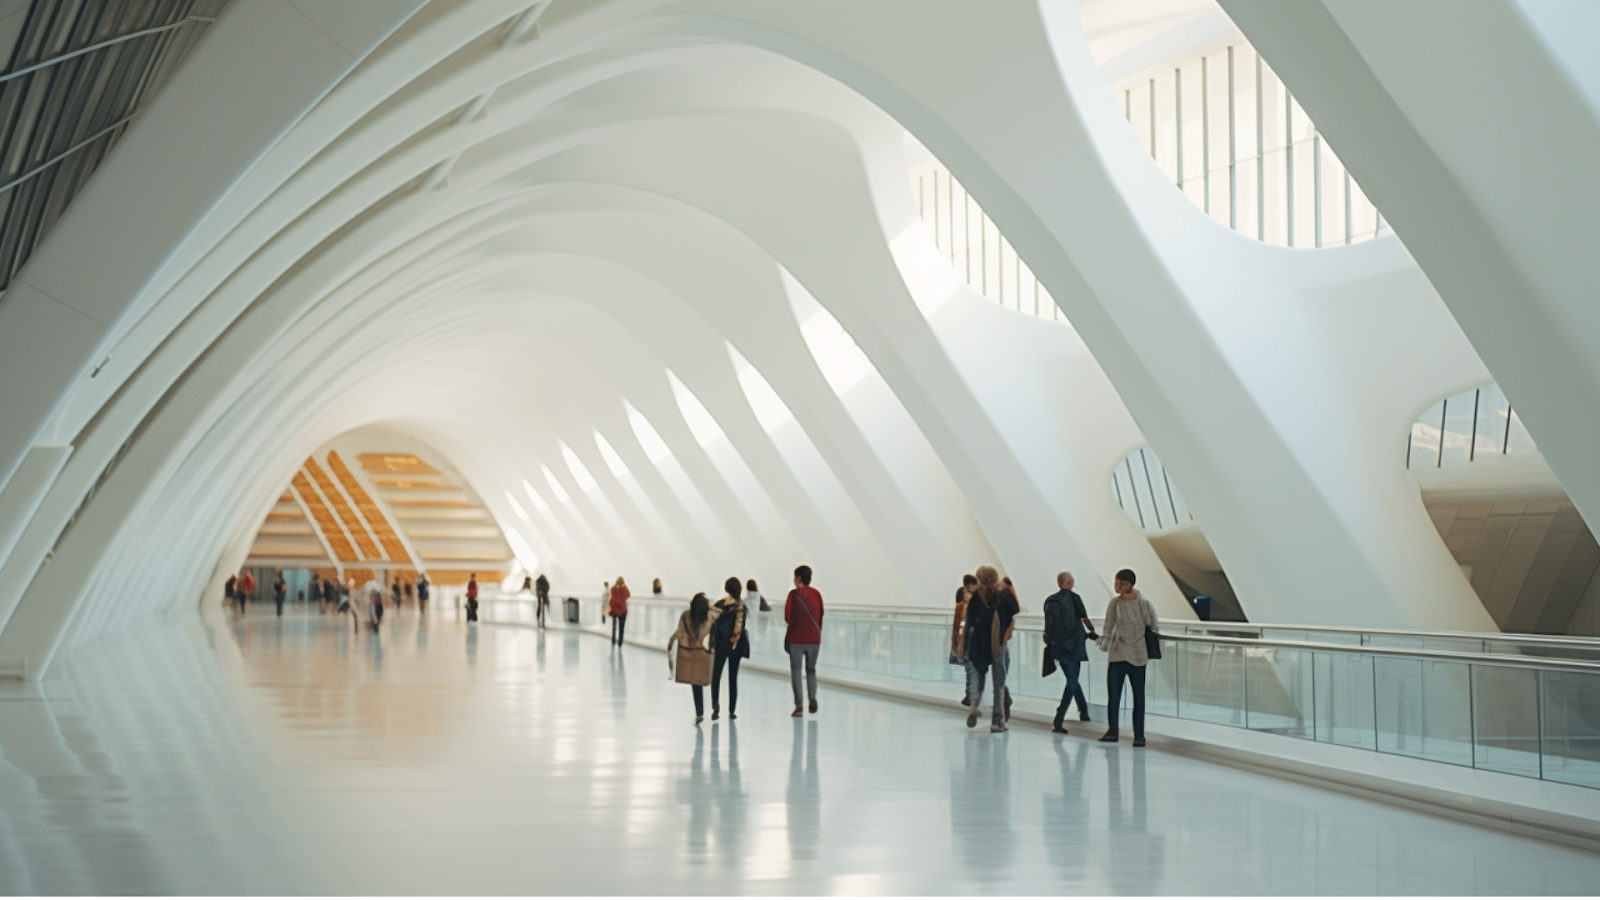 Visitors walking through the white, bone-like corridors inside Valencia's City of Arts and Sciences.